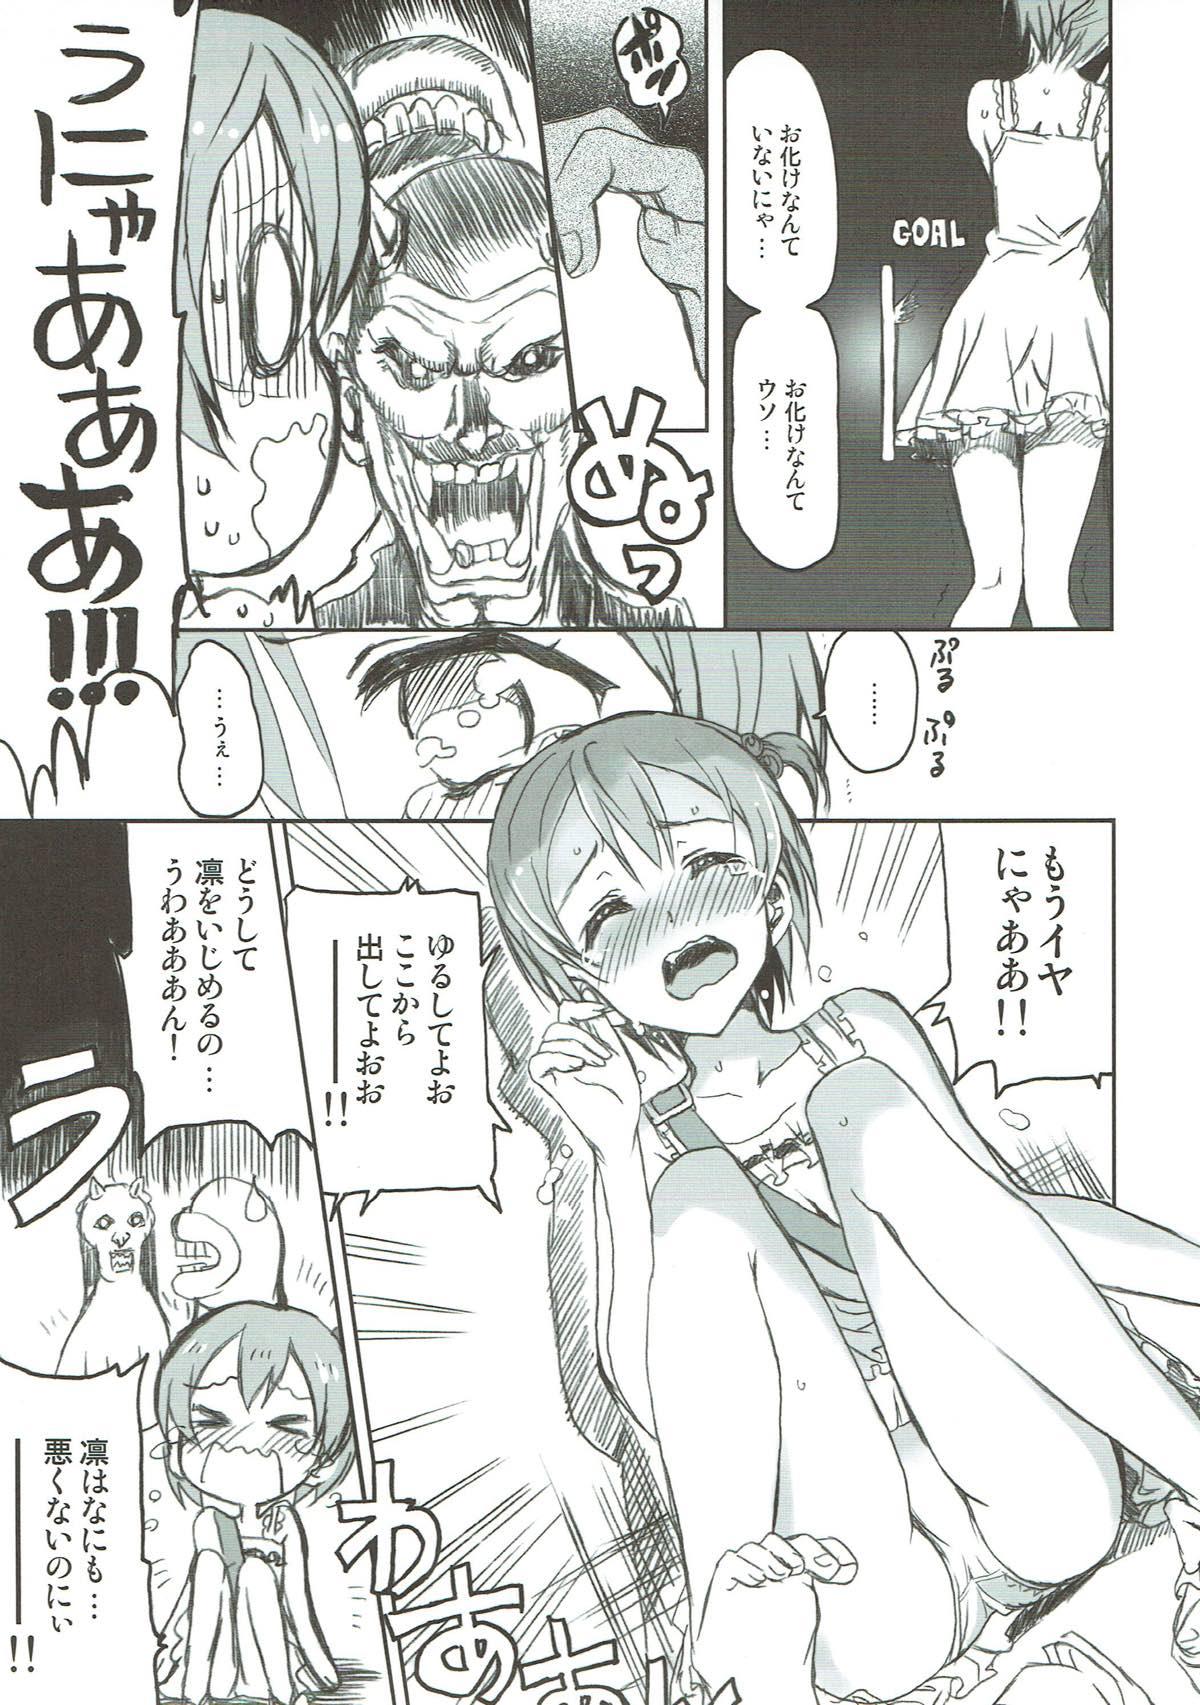 Handsome Hoshisora Kanojo. - Love live Swallow - Page 12